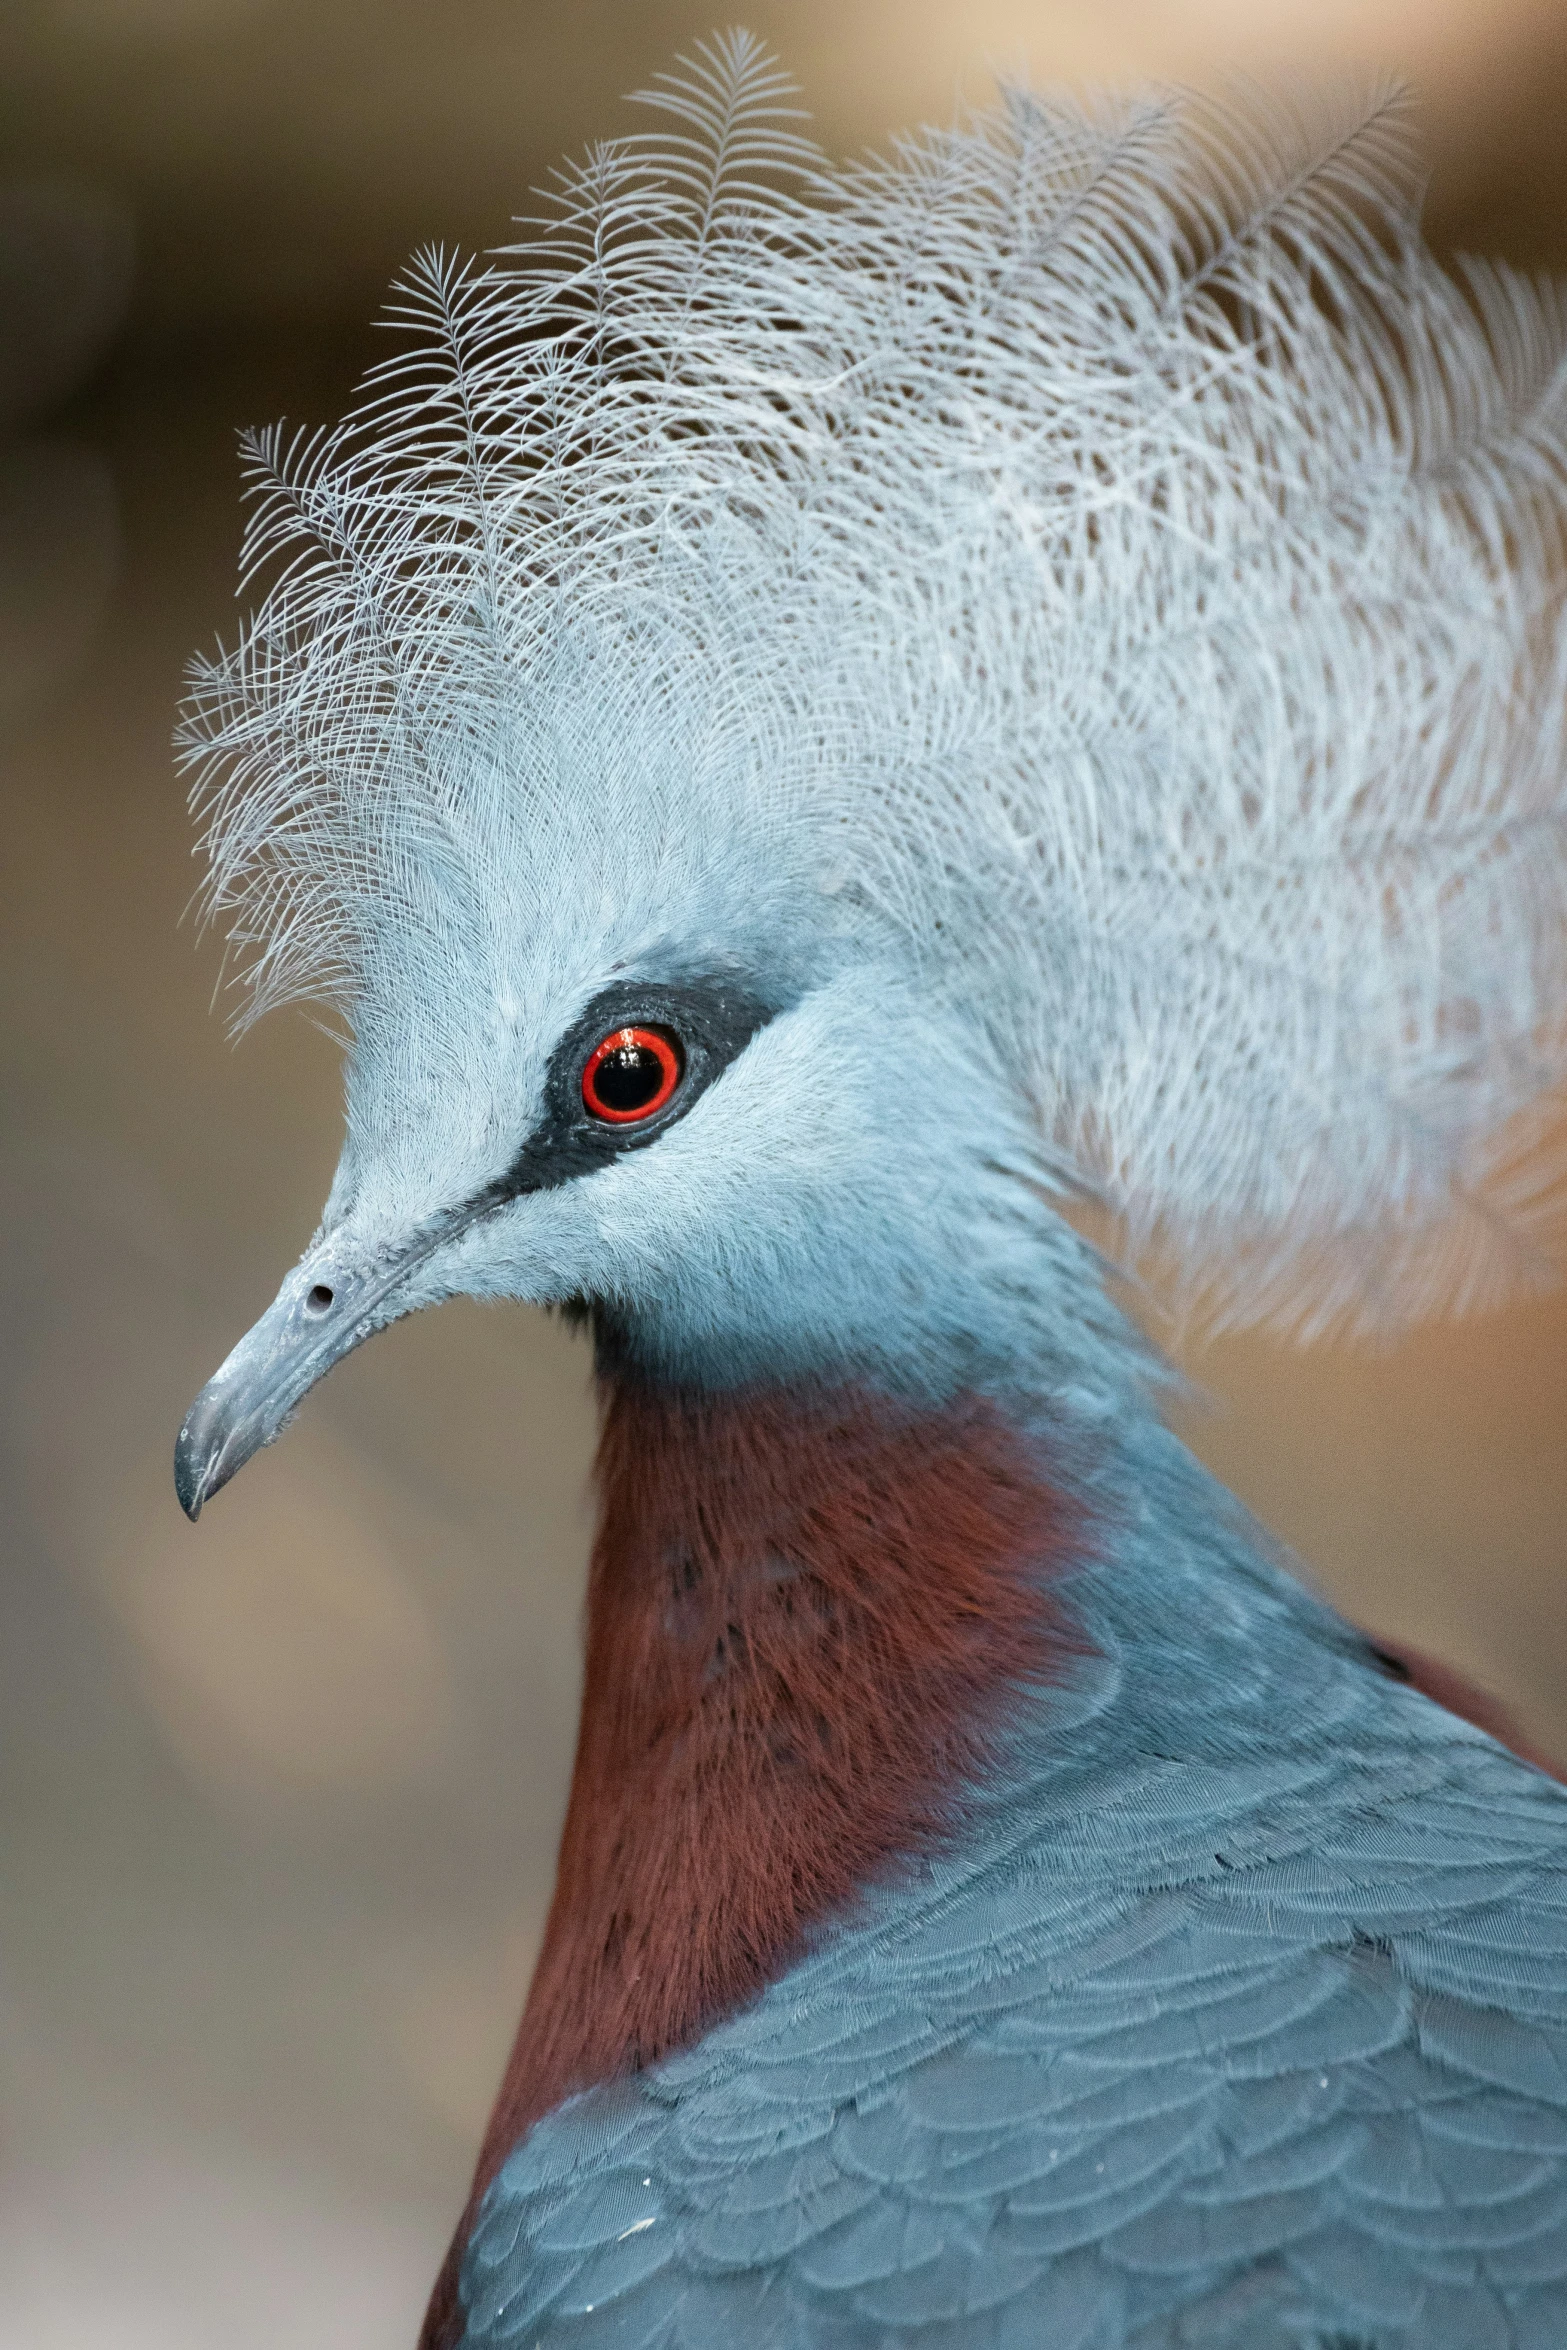 a bird with white hair and red eyes looking at soing